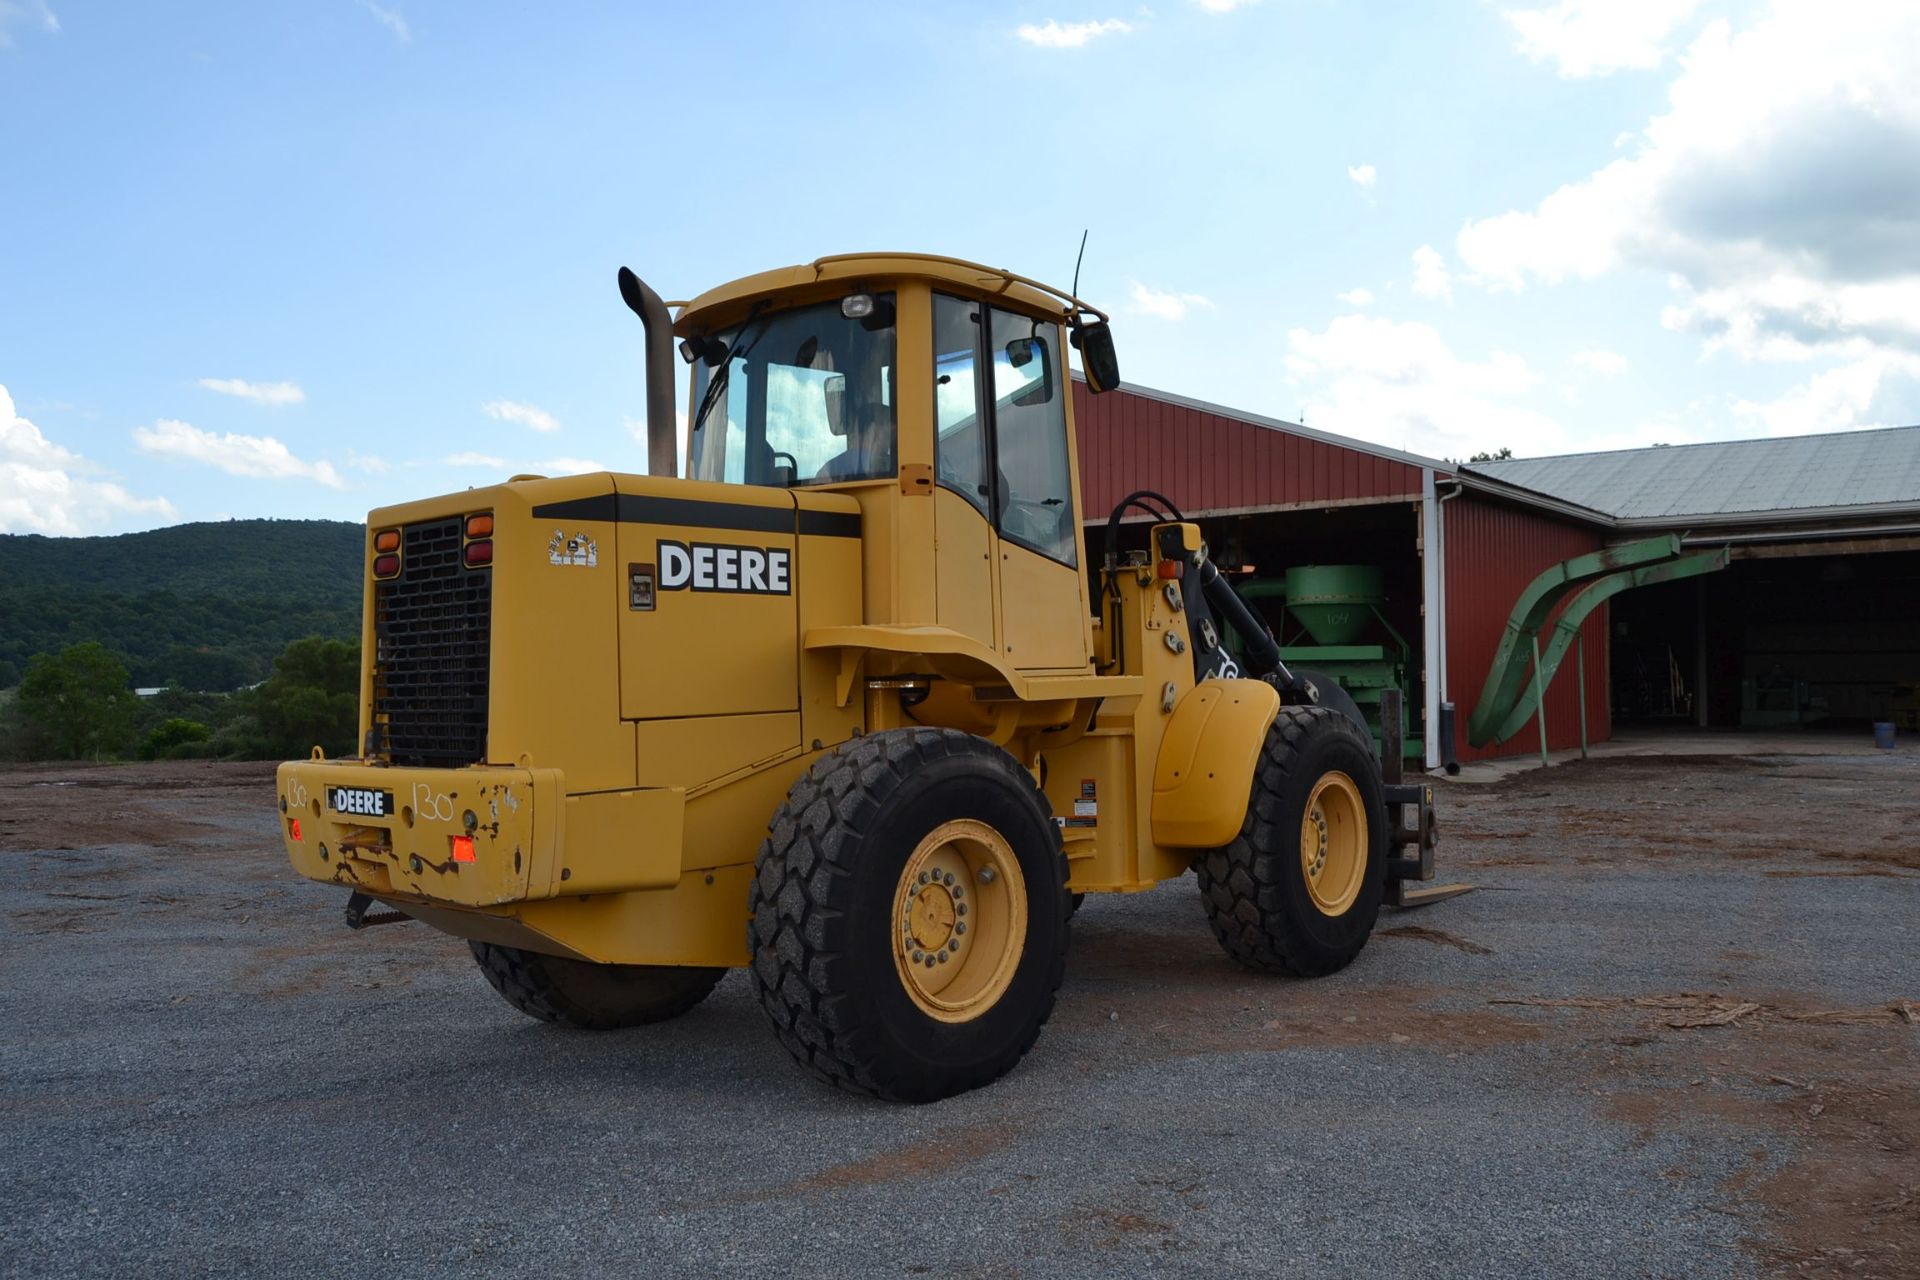 JOHN DEERE TC44H ARTICULATING WHEEL LOADER W/ FORKS W/ SINGLE HOLD DOWN W/ ENCLOSED CAB W/ 17.5Z25 - Image 3 of 4